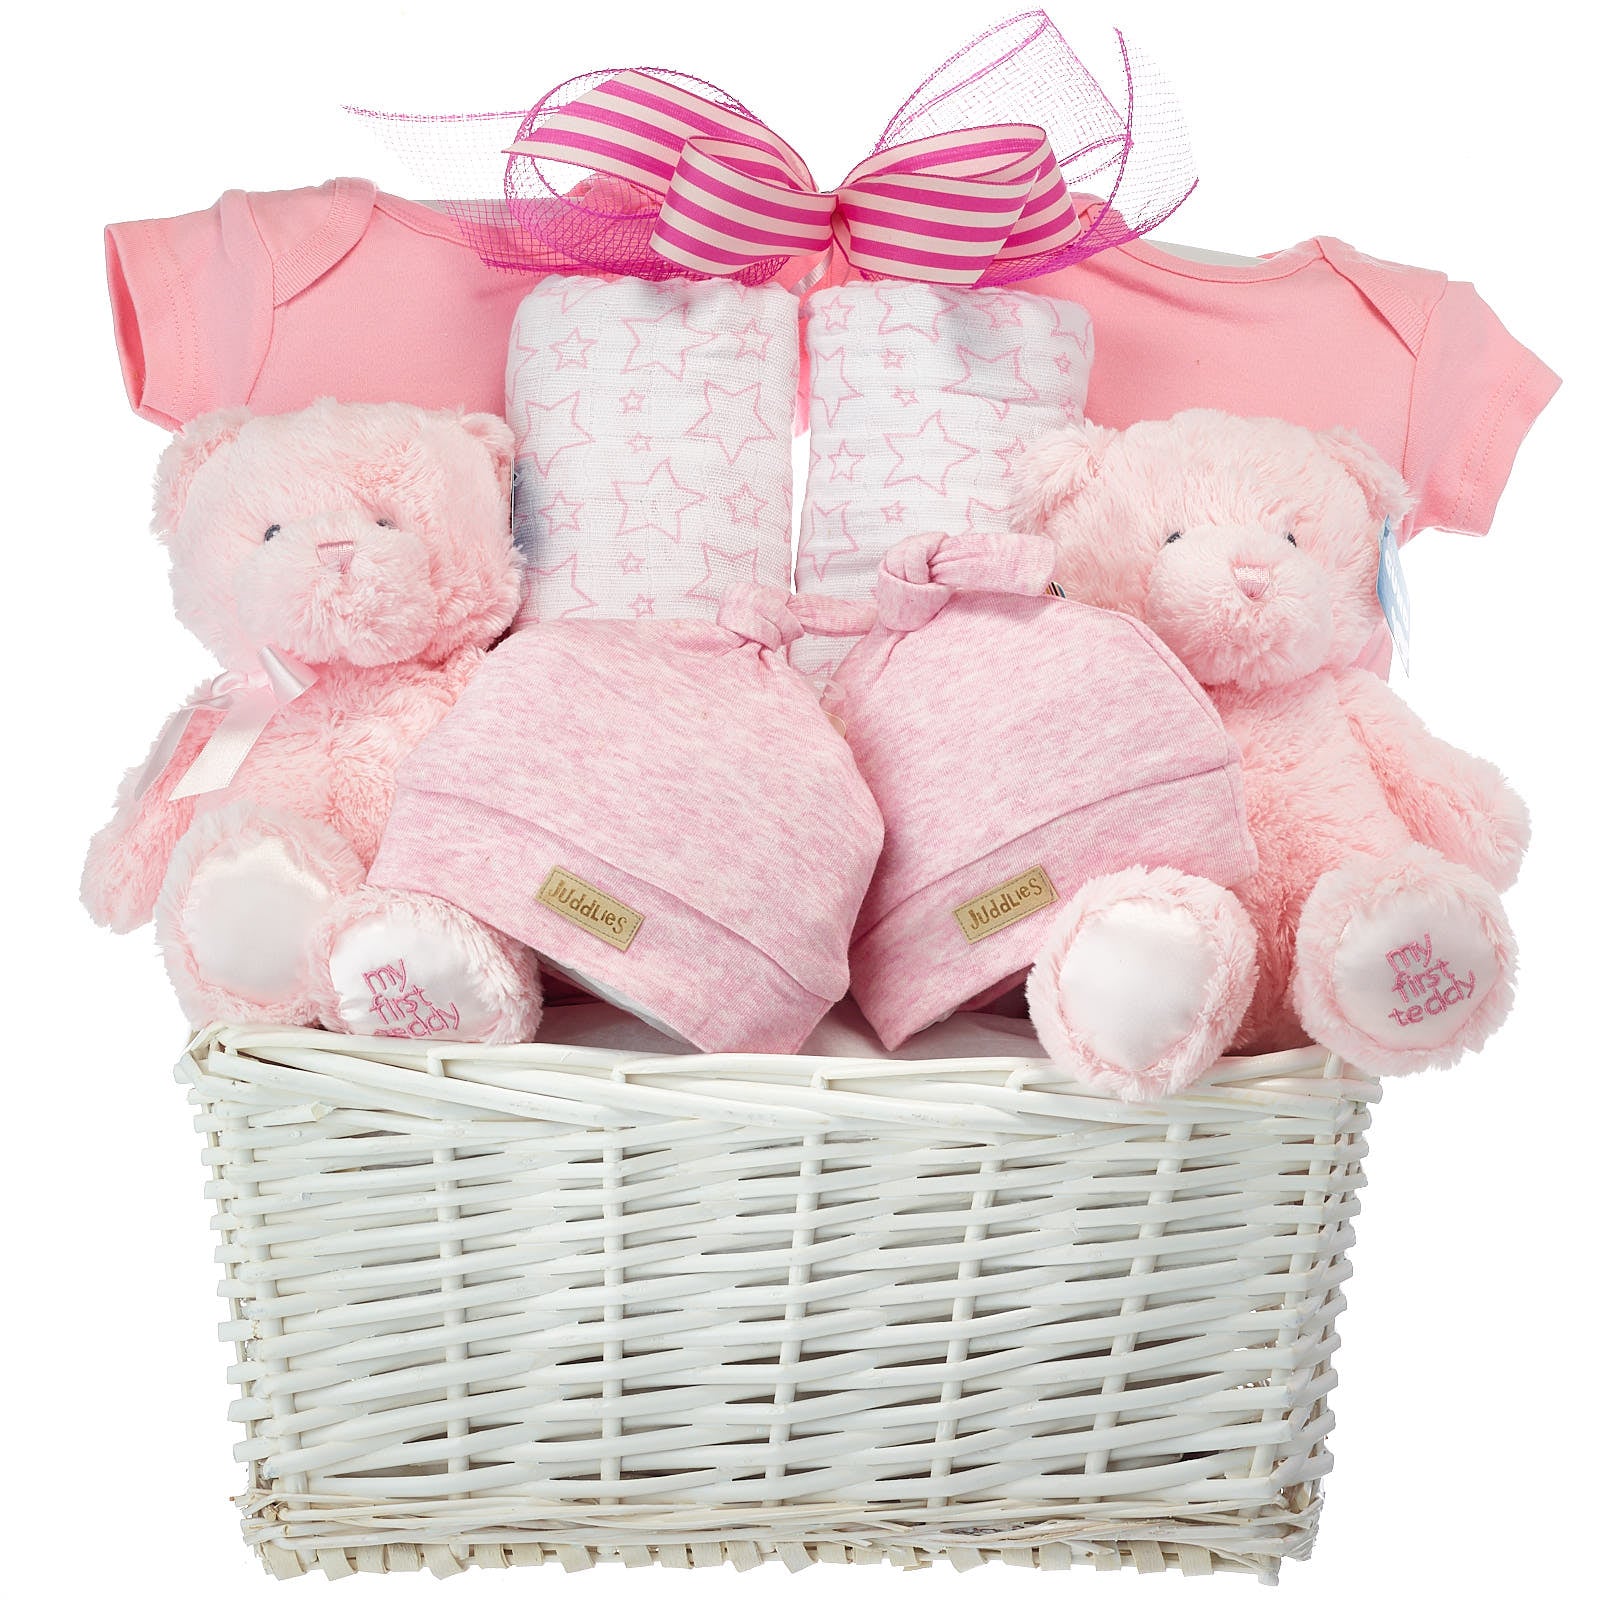 Twin Girls Baskets Delivery